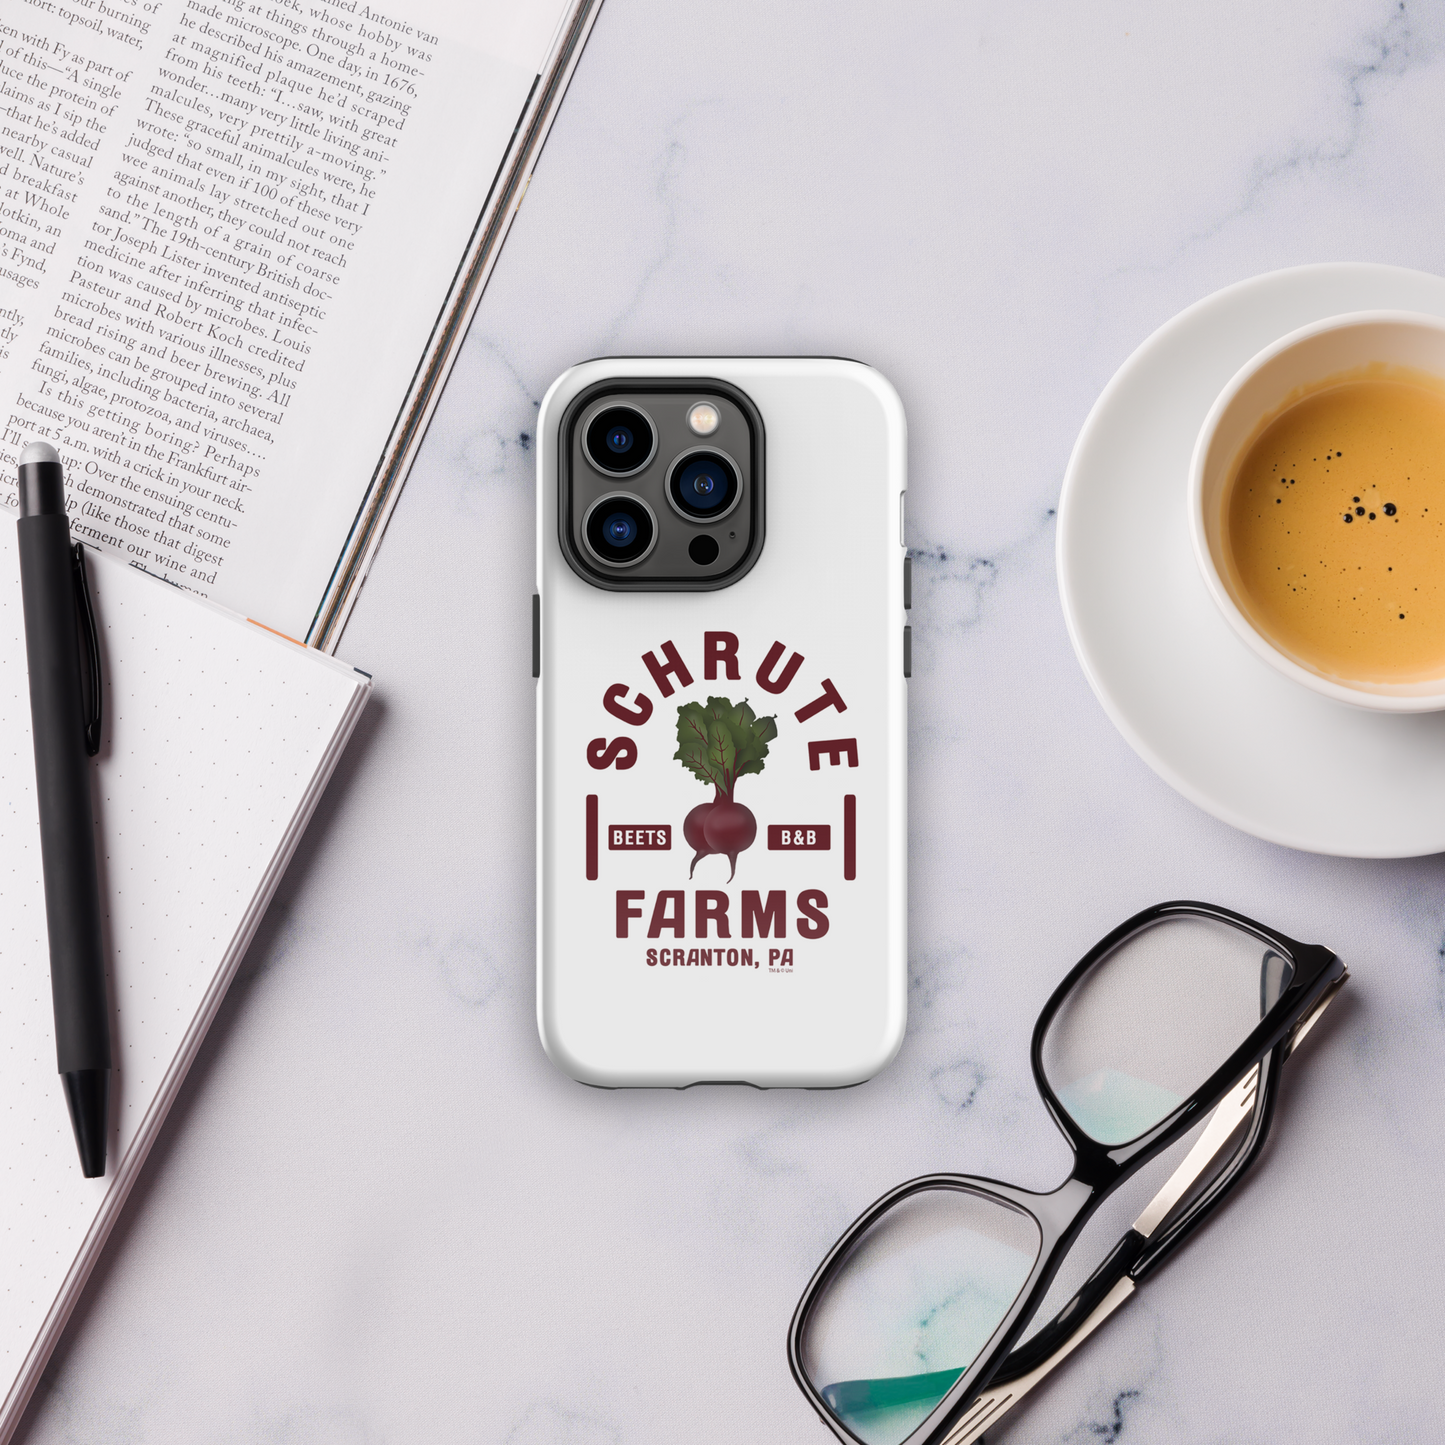 The Office Schrute Farms Tough Phone Case - iPhone